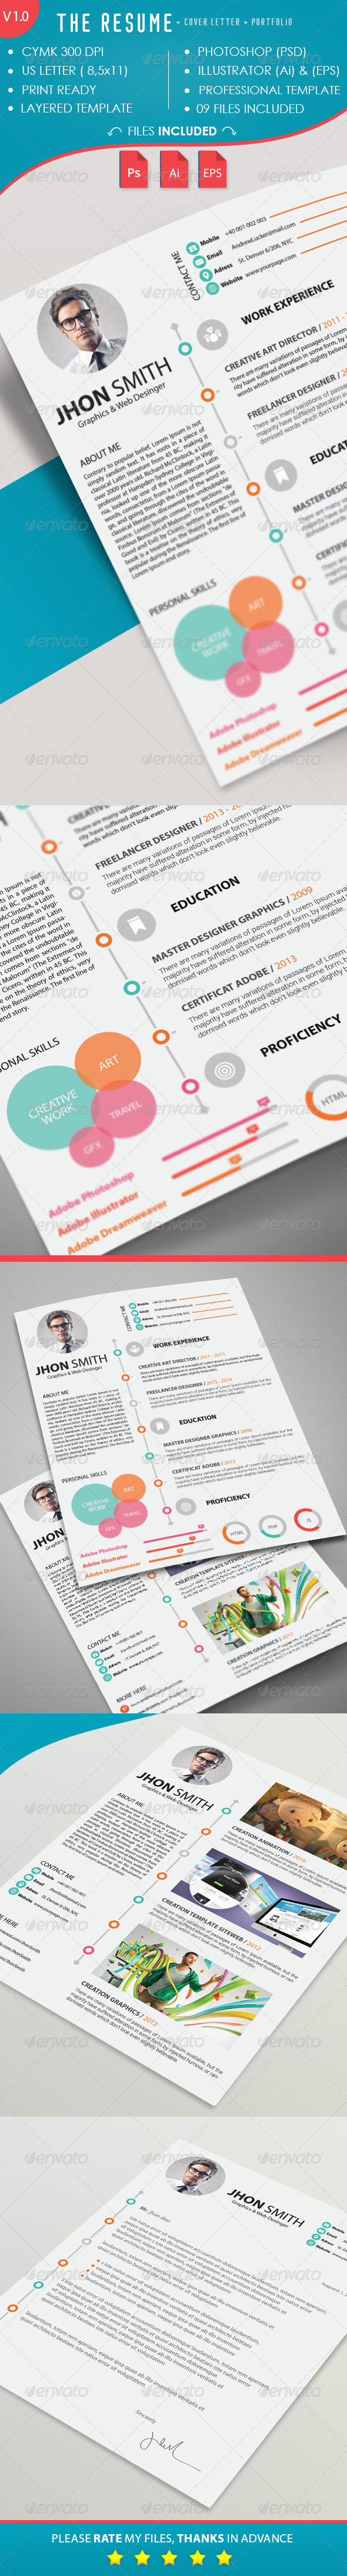 Resume preview